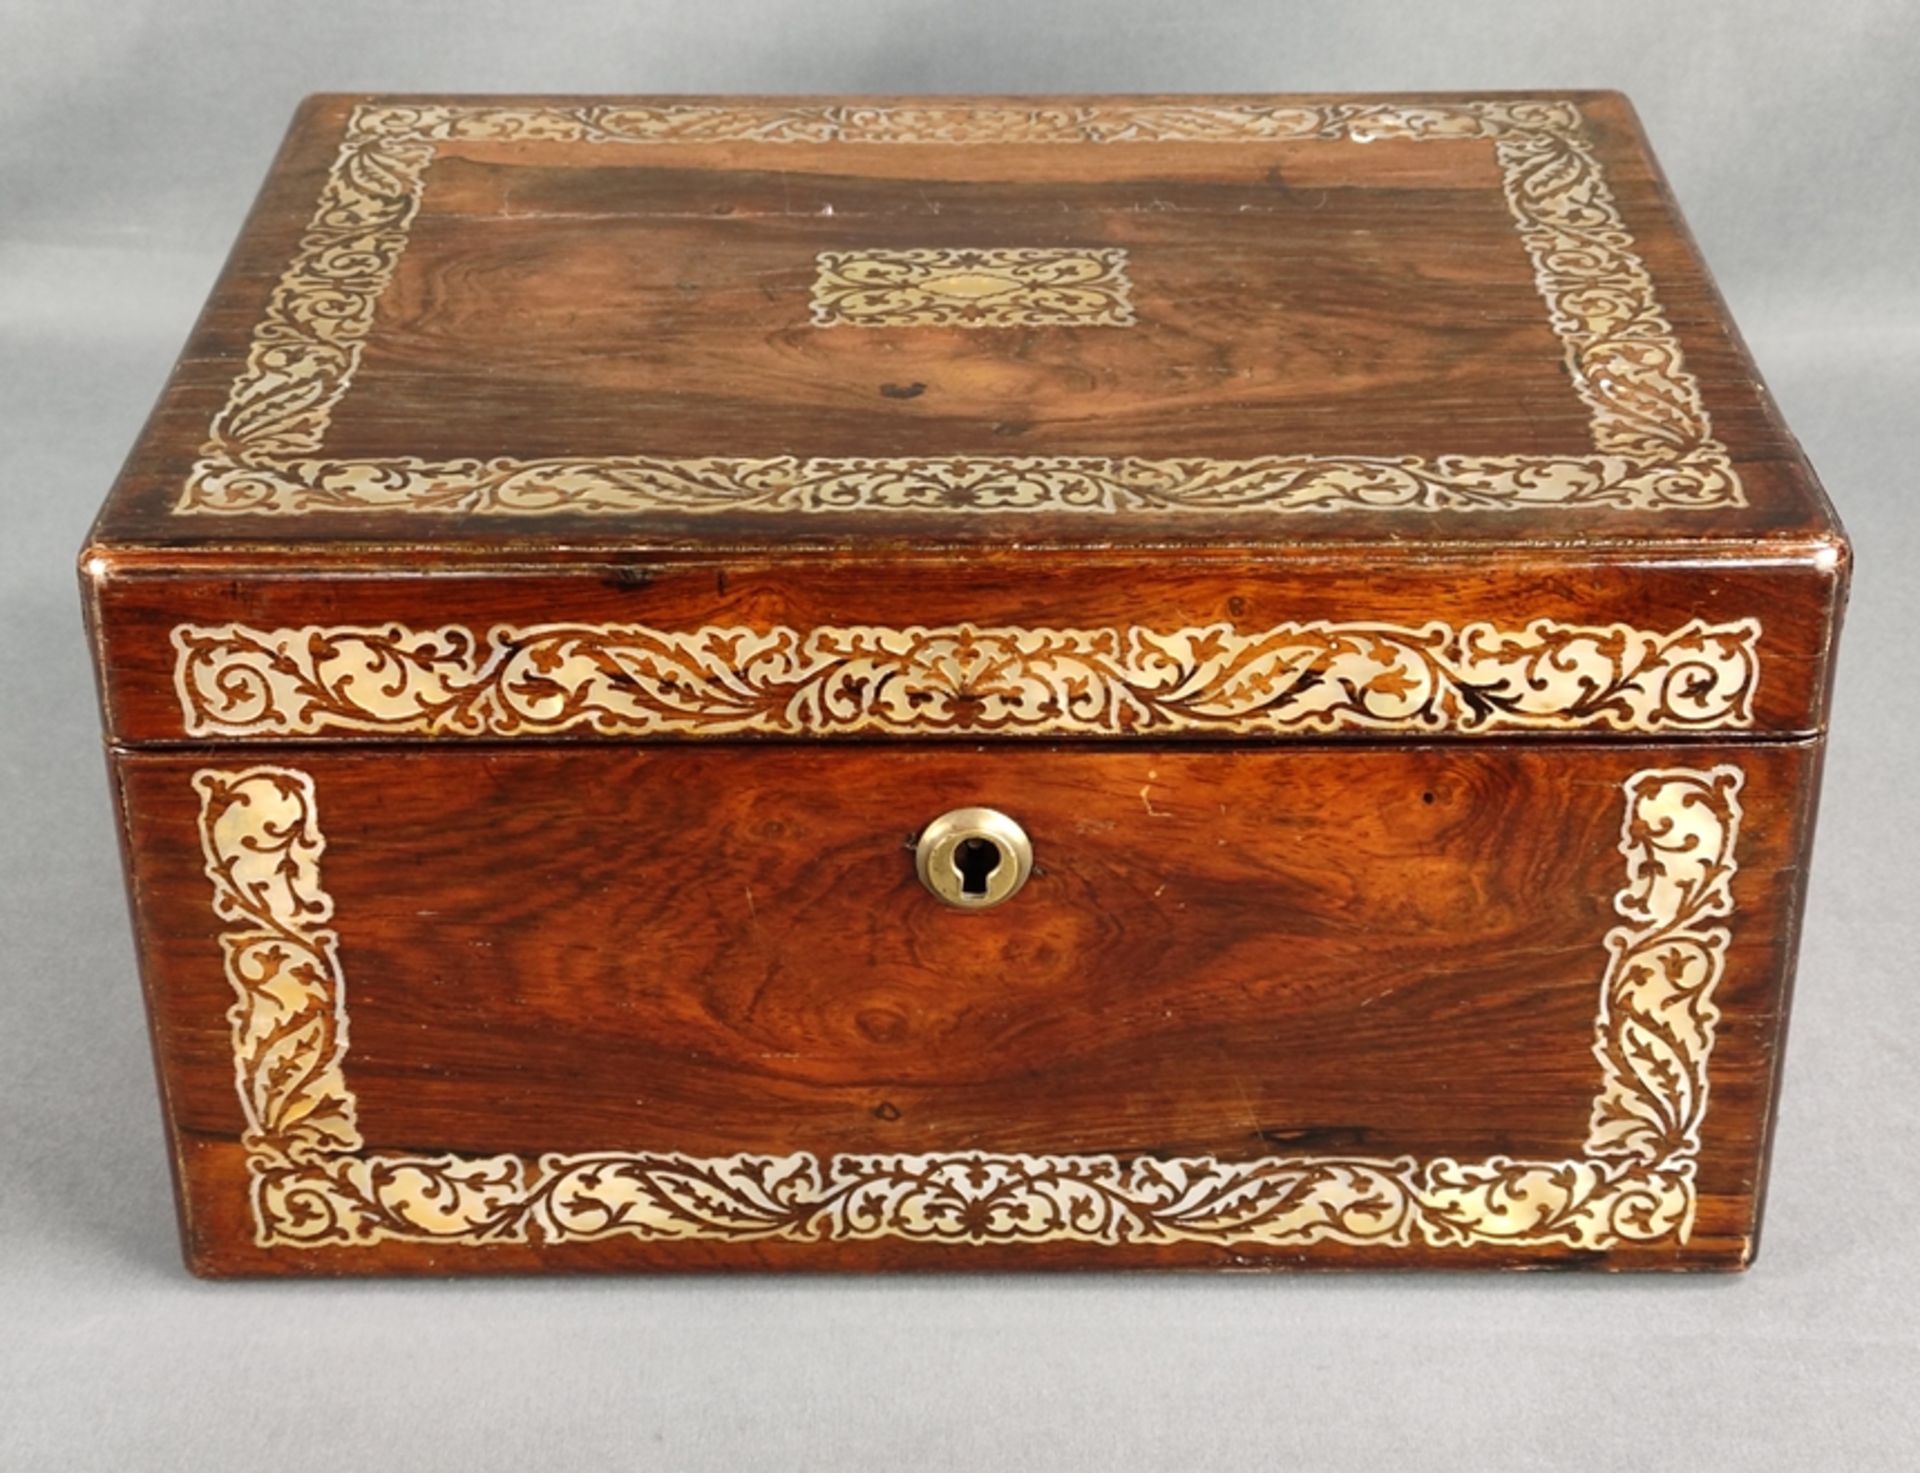 Writing chest, rectangular shape, decorated with rich vegetal mother-of-pearl inlays, inside severa